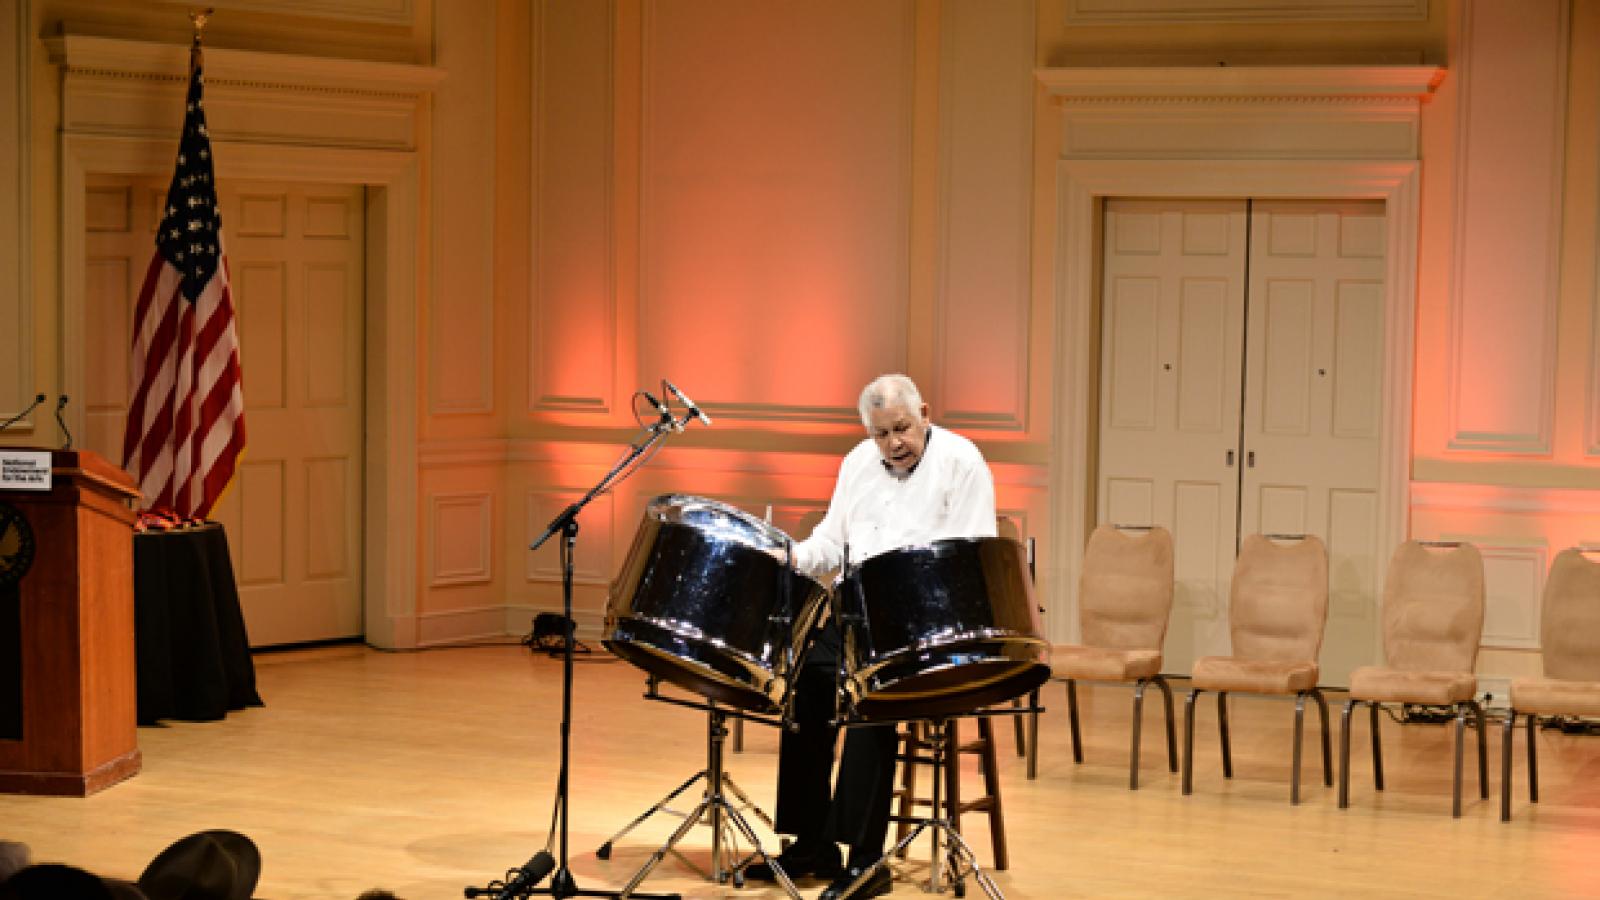 A man sits on a stage behind three steel drums